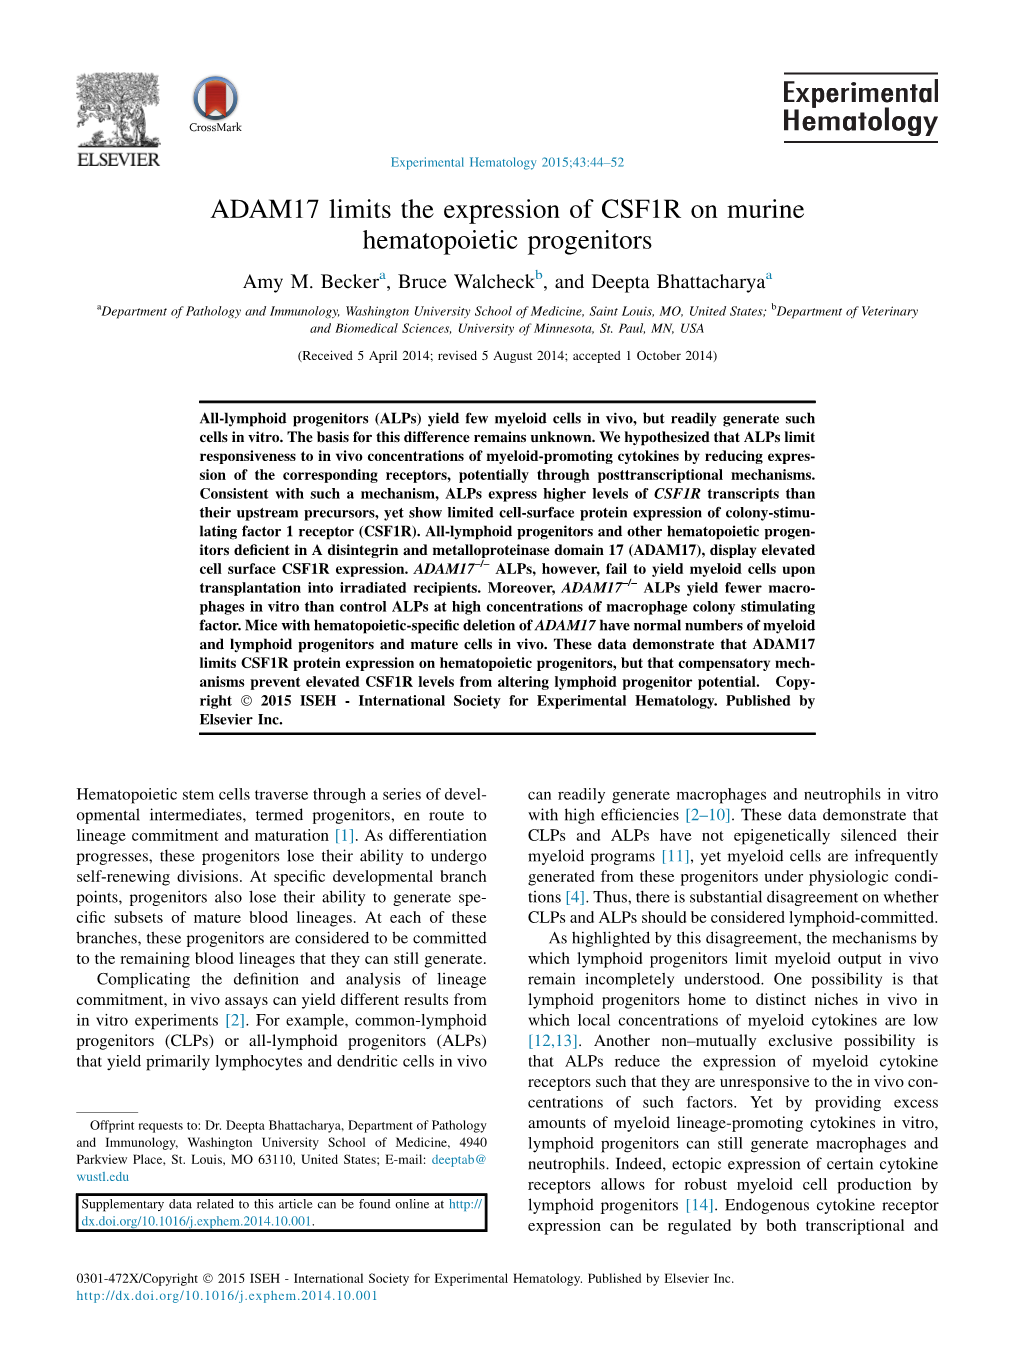 ADAM17 Limits the Expression of CSF1R on Murine Hematopoietic Progenitors Amy M